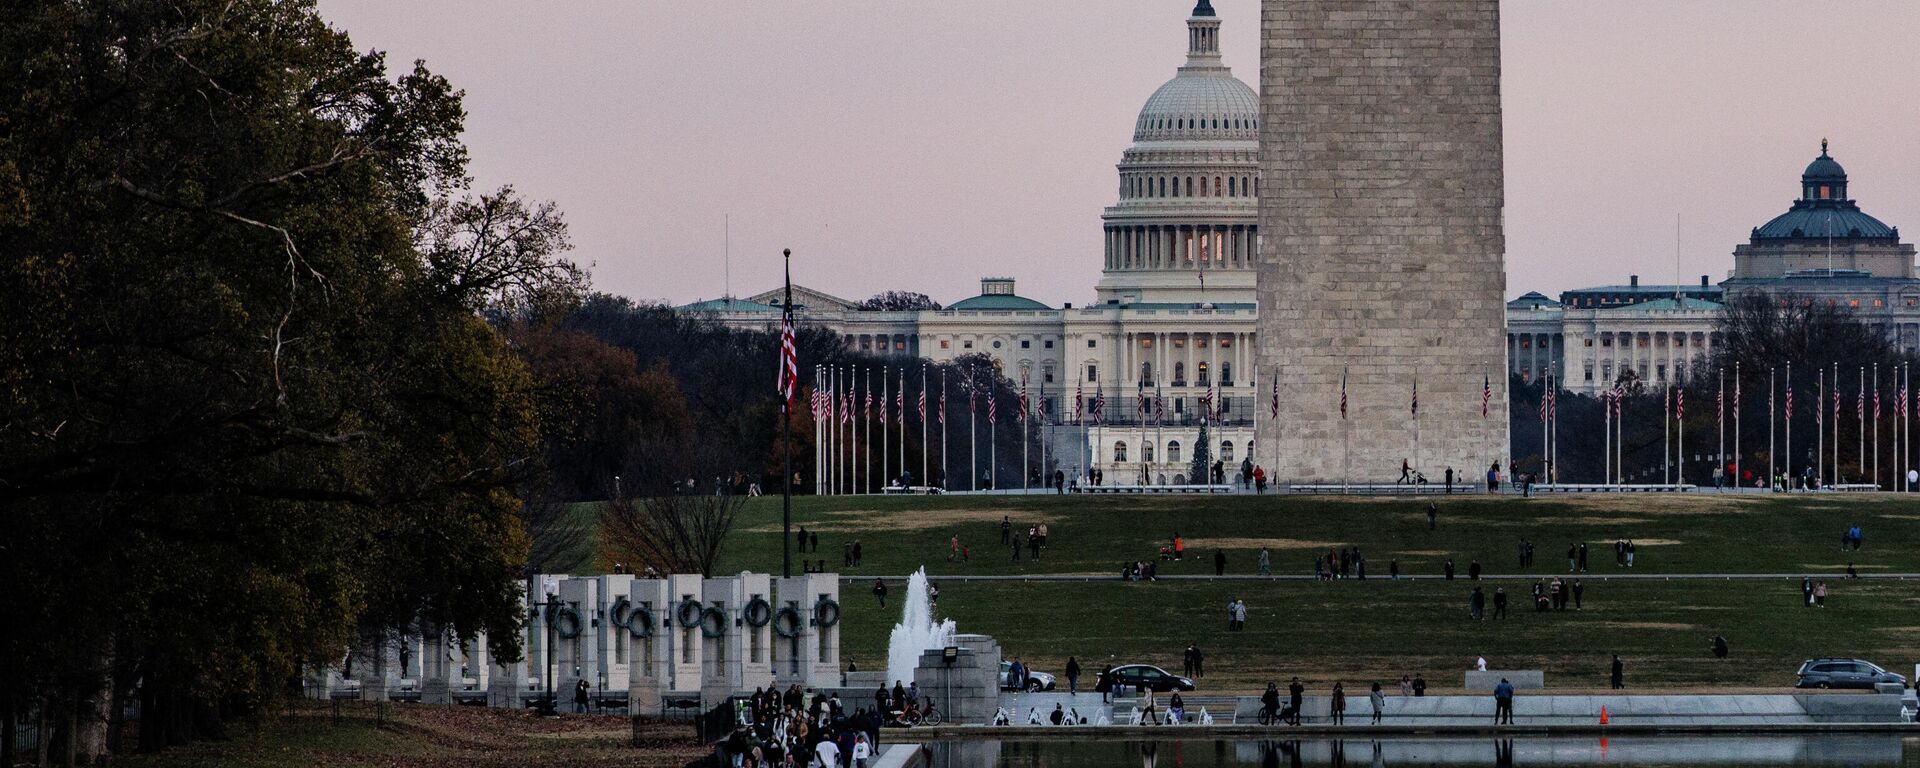 The U.S. Capitol Building is seen past the Washington Monument as people walk around the Reflecting Pool on the National Mall as the sun sets on November 28, 2021 in Washington, DC. President Biden returned to Washington after spending the Thanksgiving Holiday with family in Nantucket and immediately met with members of his medical team to discuss the newly discovered Omicron variant of the coronavirus. - Sputnik International, 1920, 08.01.2022